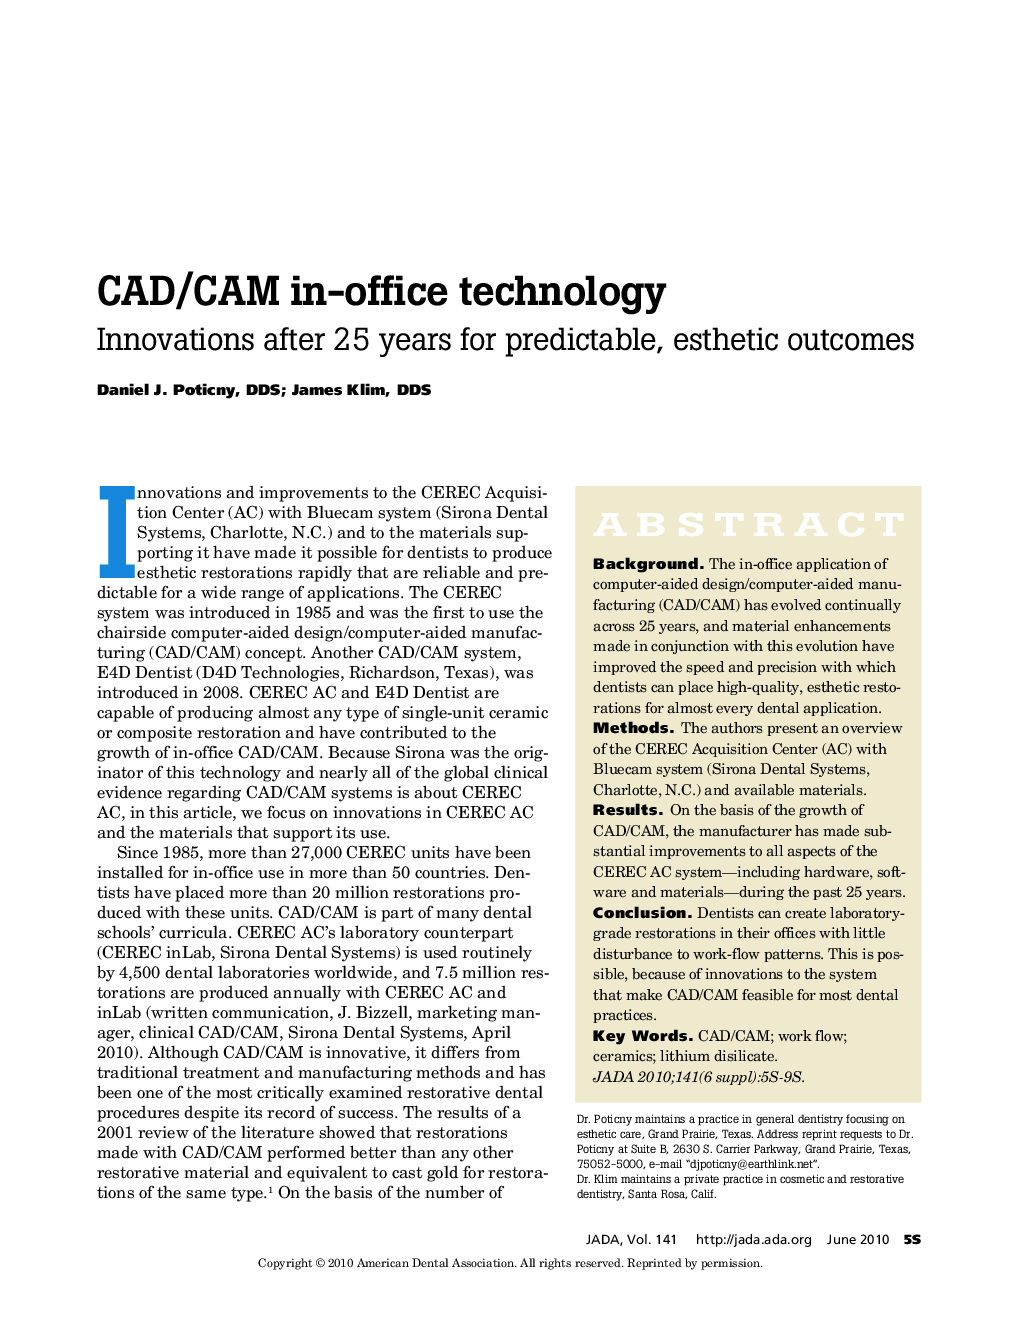 CAD/CAM In-office Technology : Innovations After 25 years for Predictable, Esthetic Outcomes